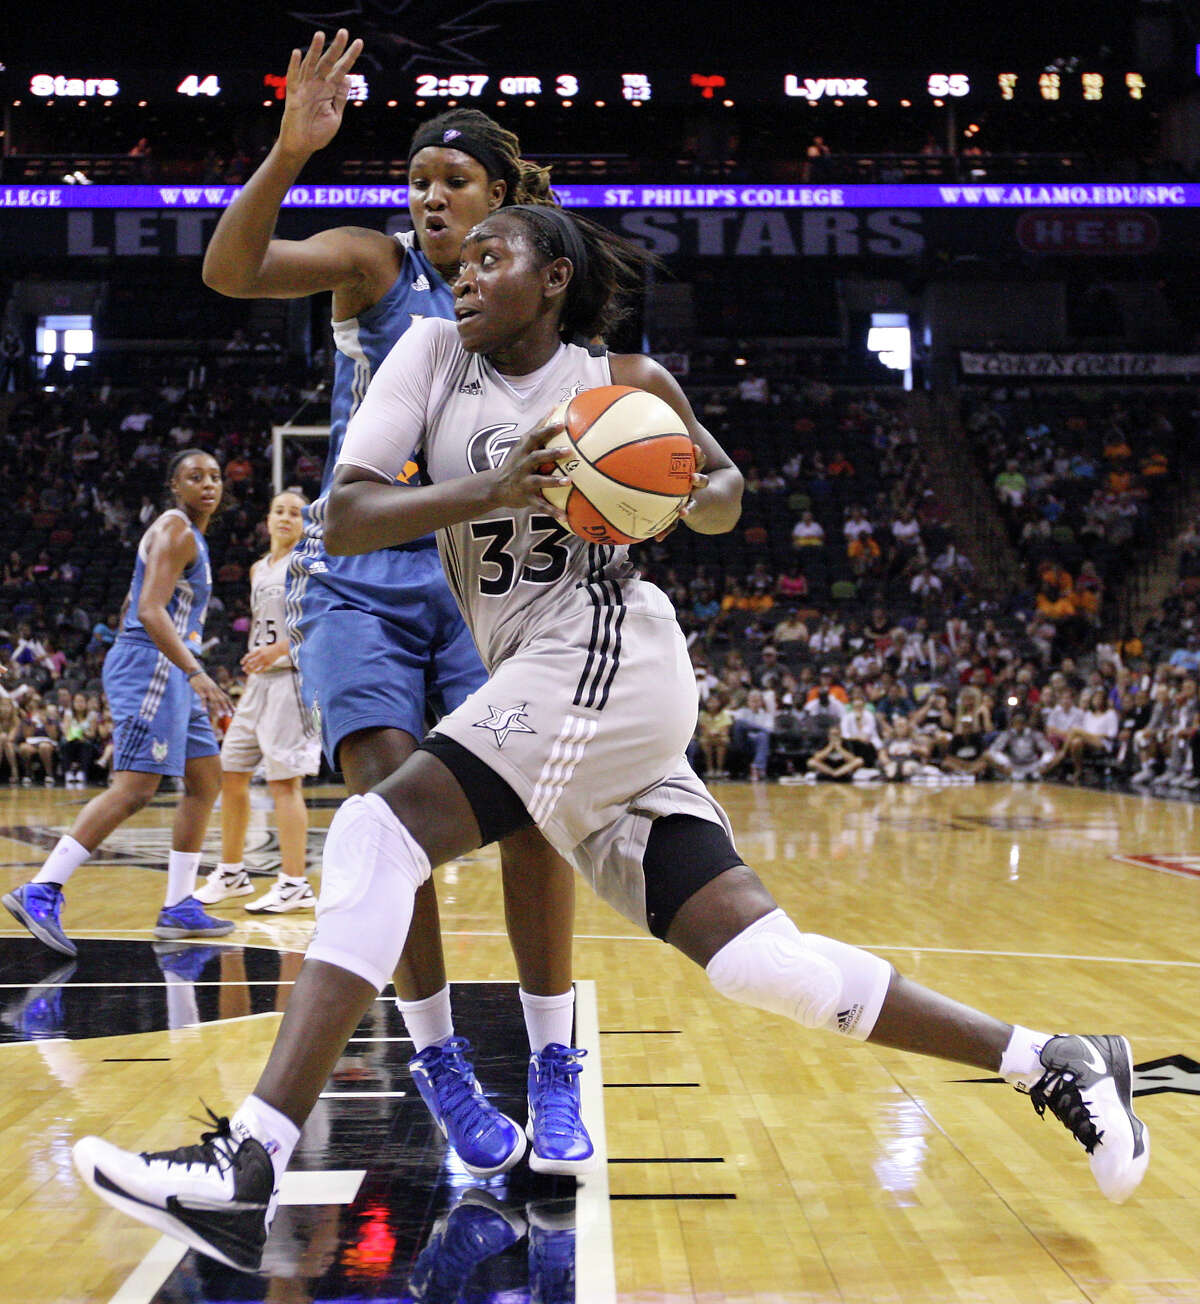 Silver Stars' Sophia Young looks for room around Lynx's Rebekkah Brunson during second half action Sunday Sept. 9, 2012 at the AT&T Center. The Lynx won 81-62.